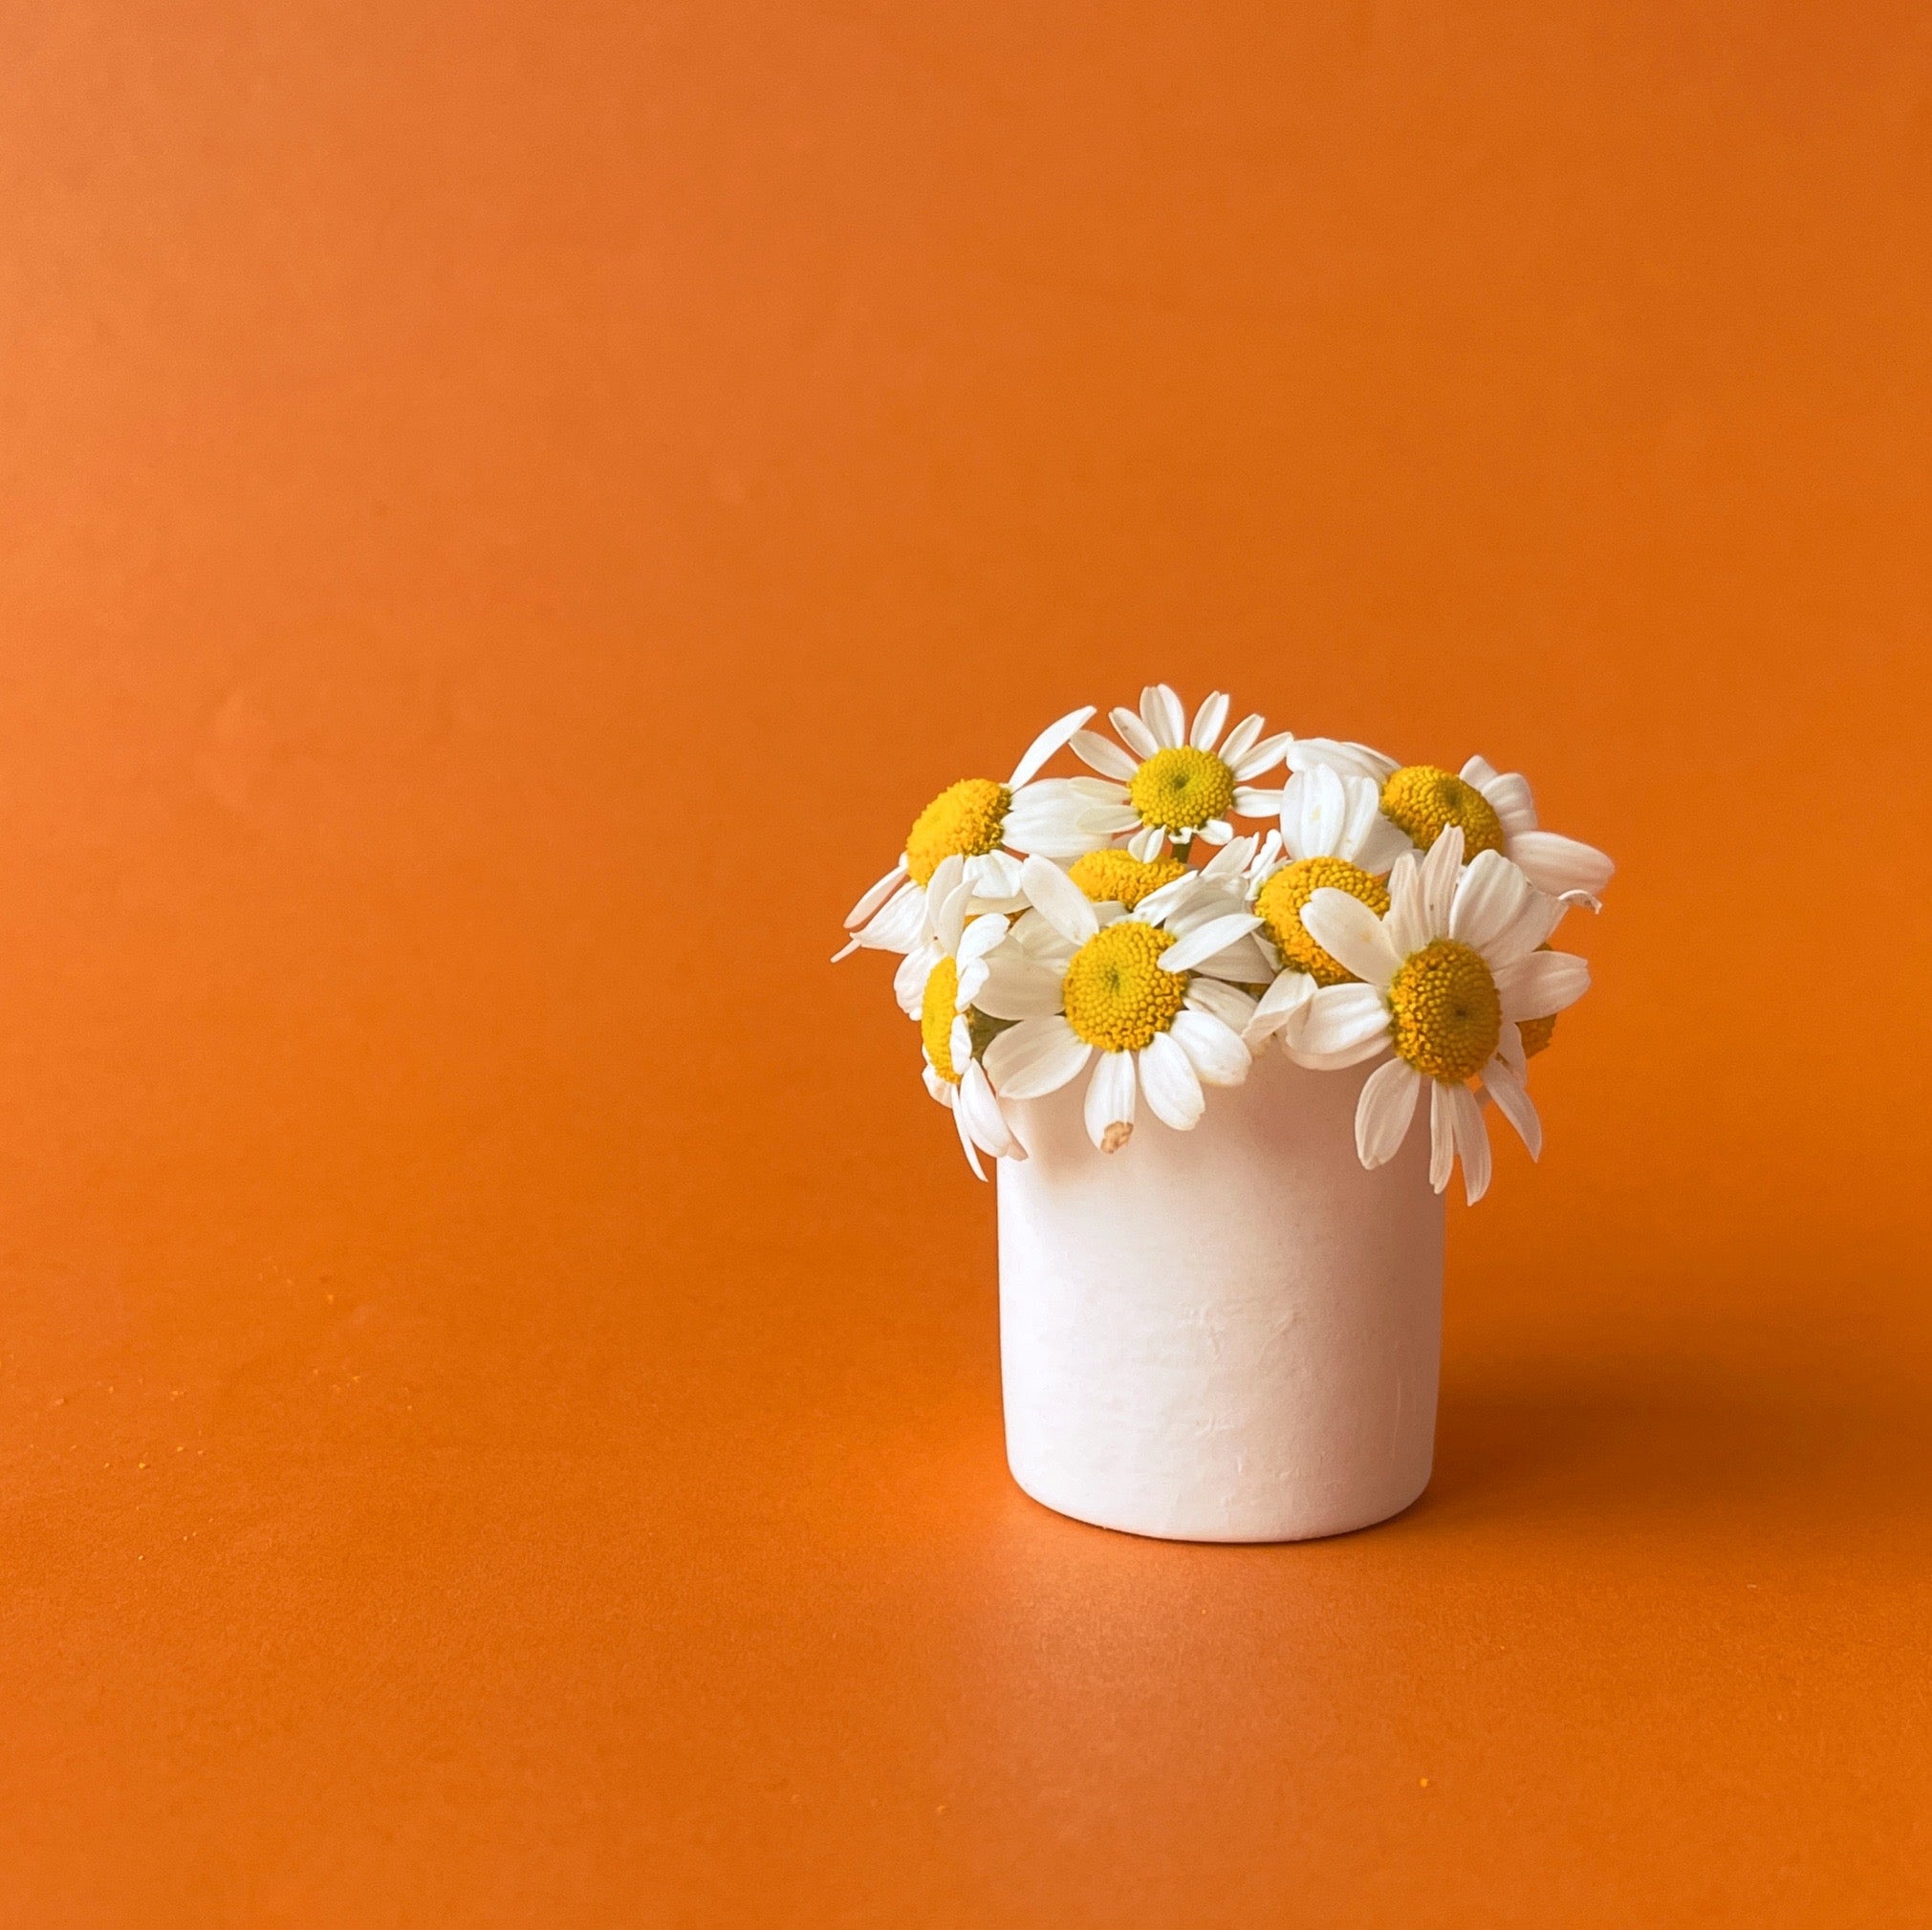 On an orange background is a white ceramic tiny pot filled with tiny daisies. 